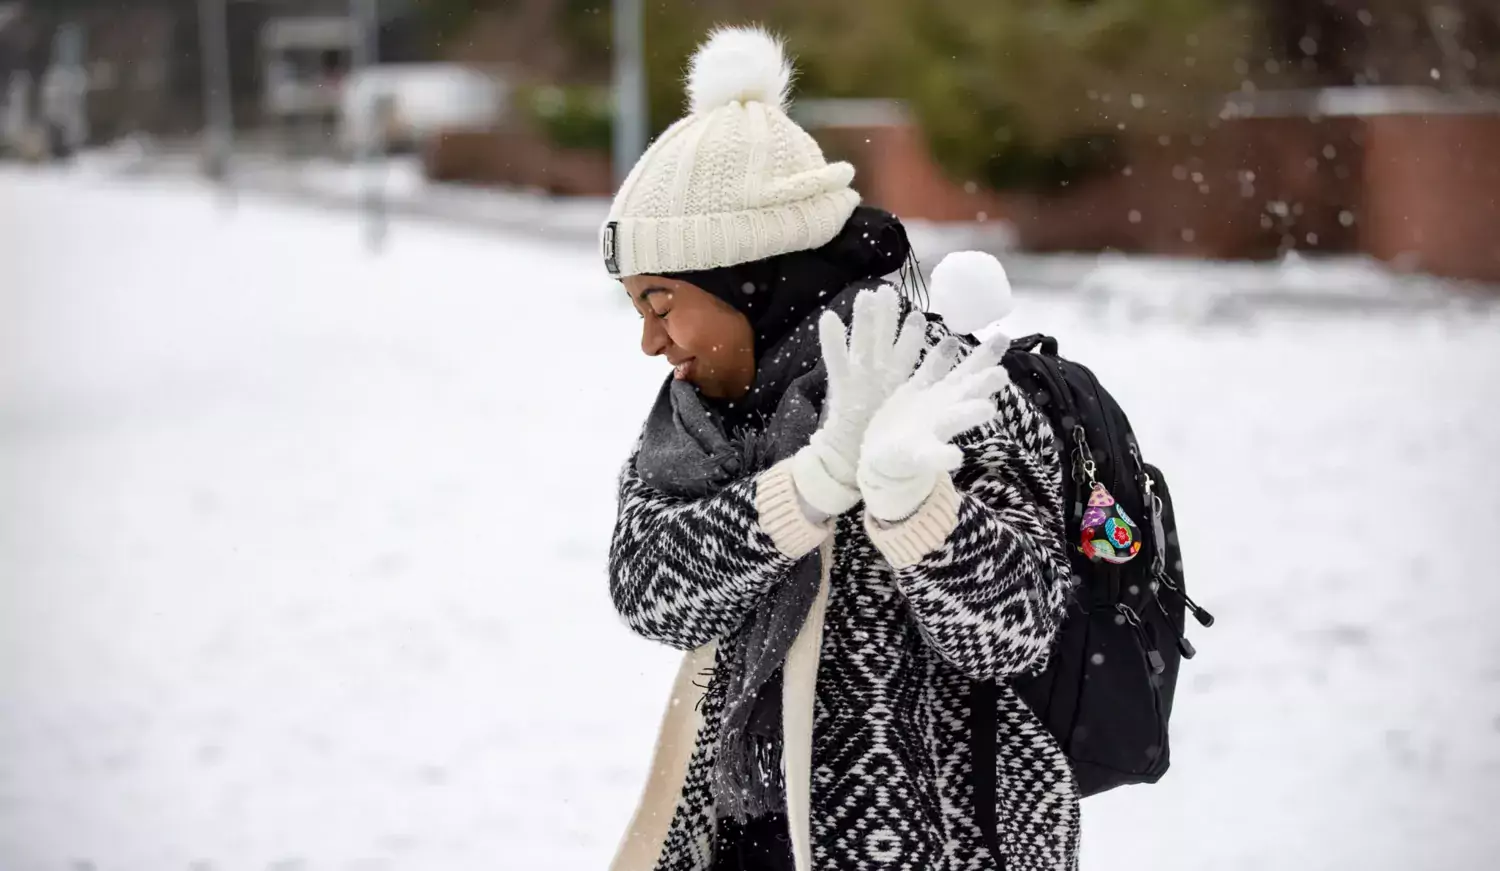 Student catching snow ball